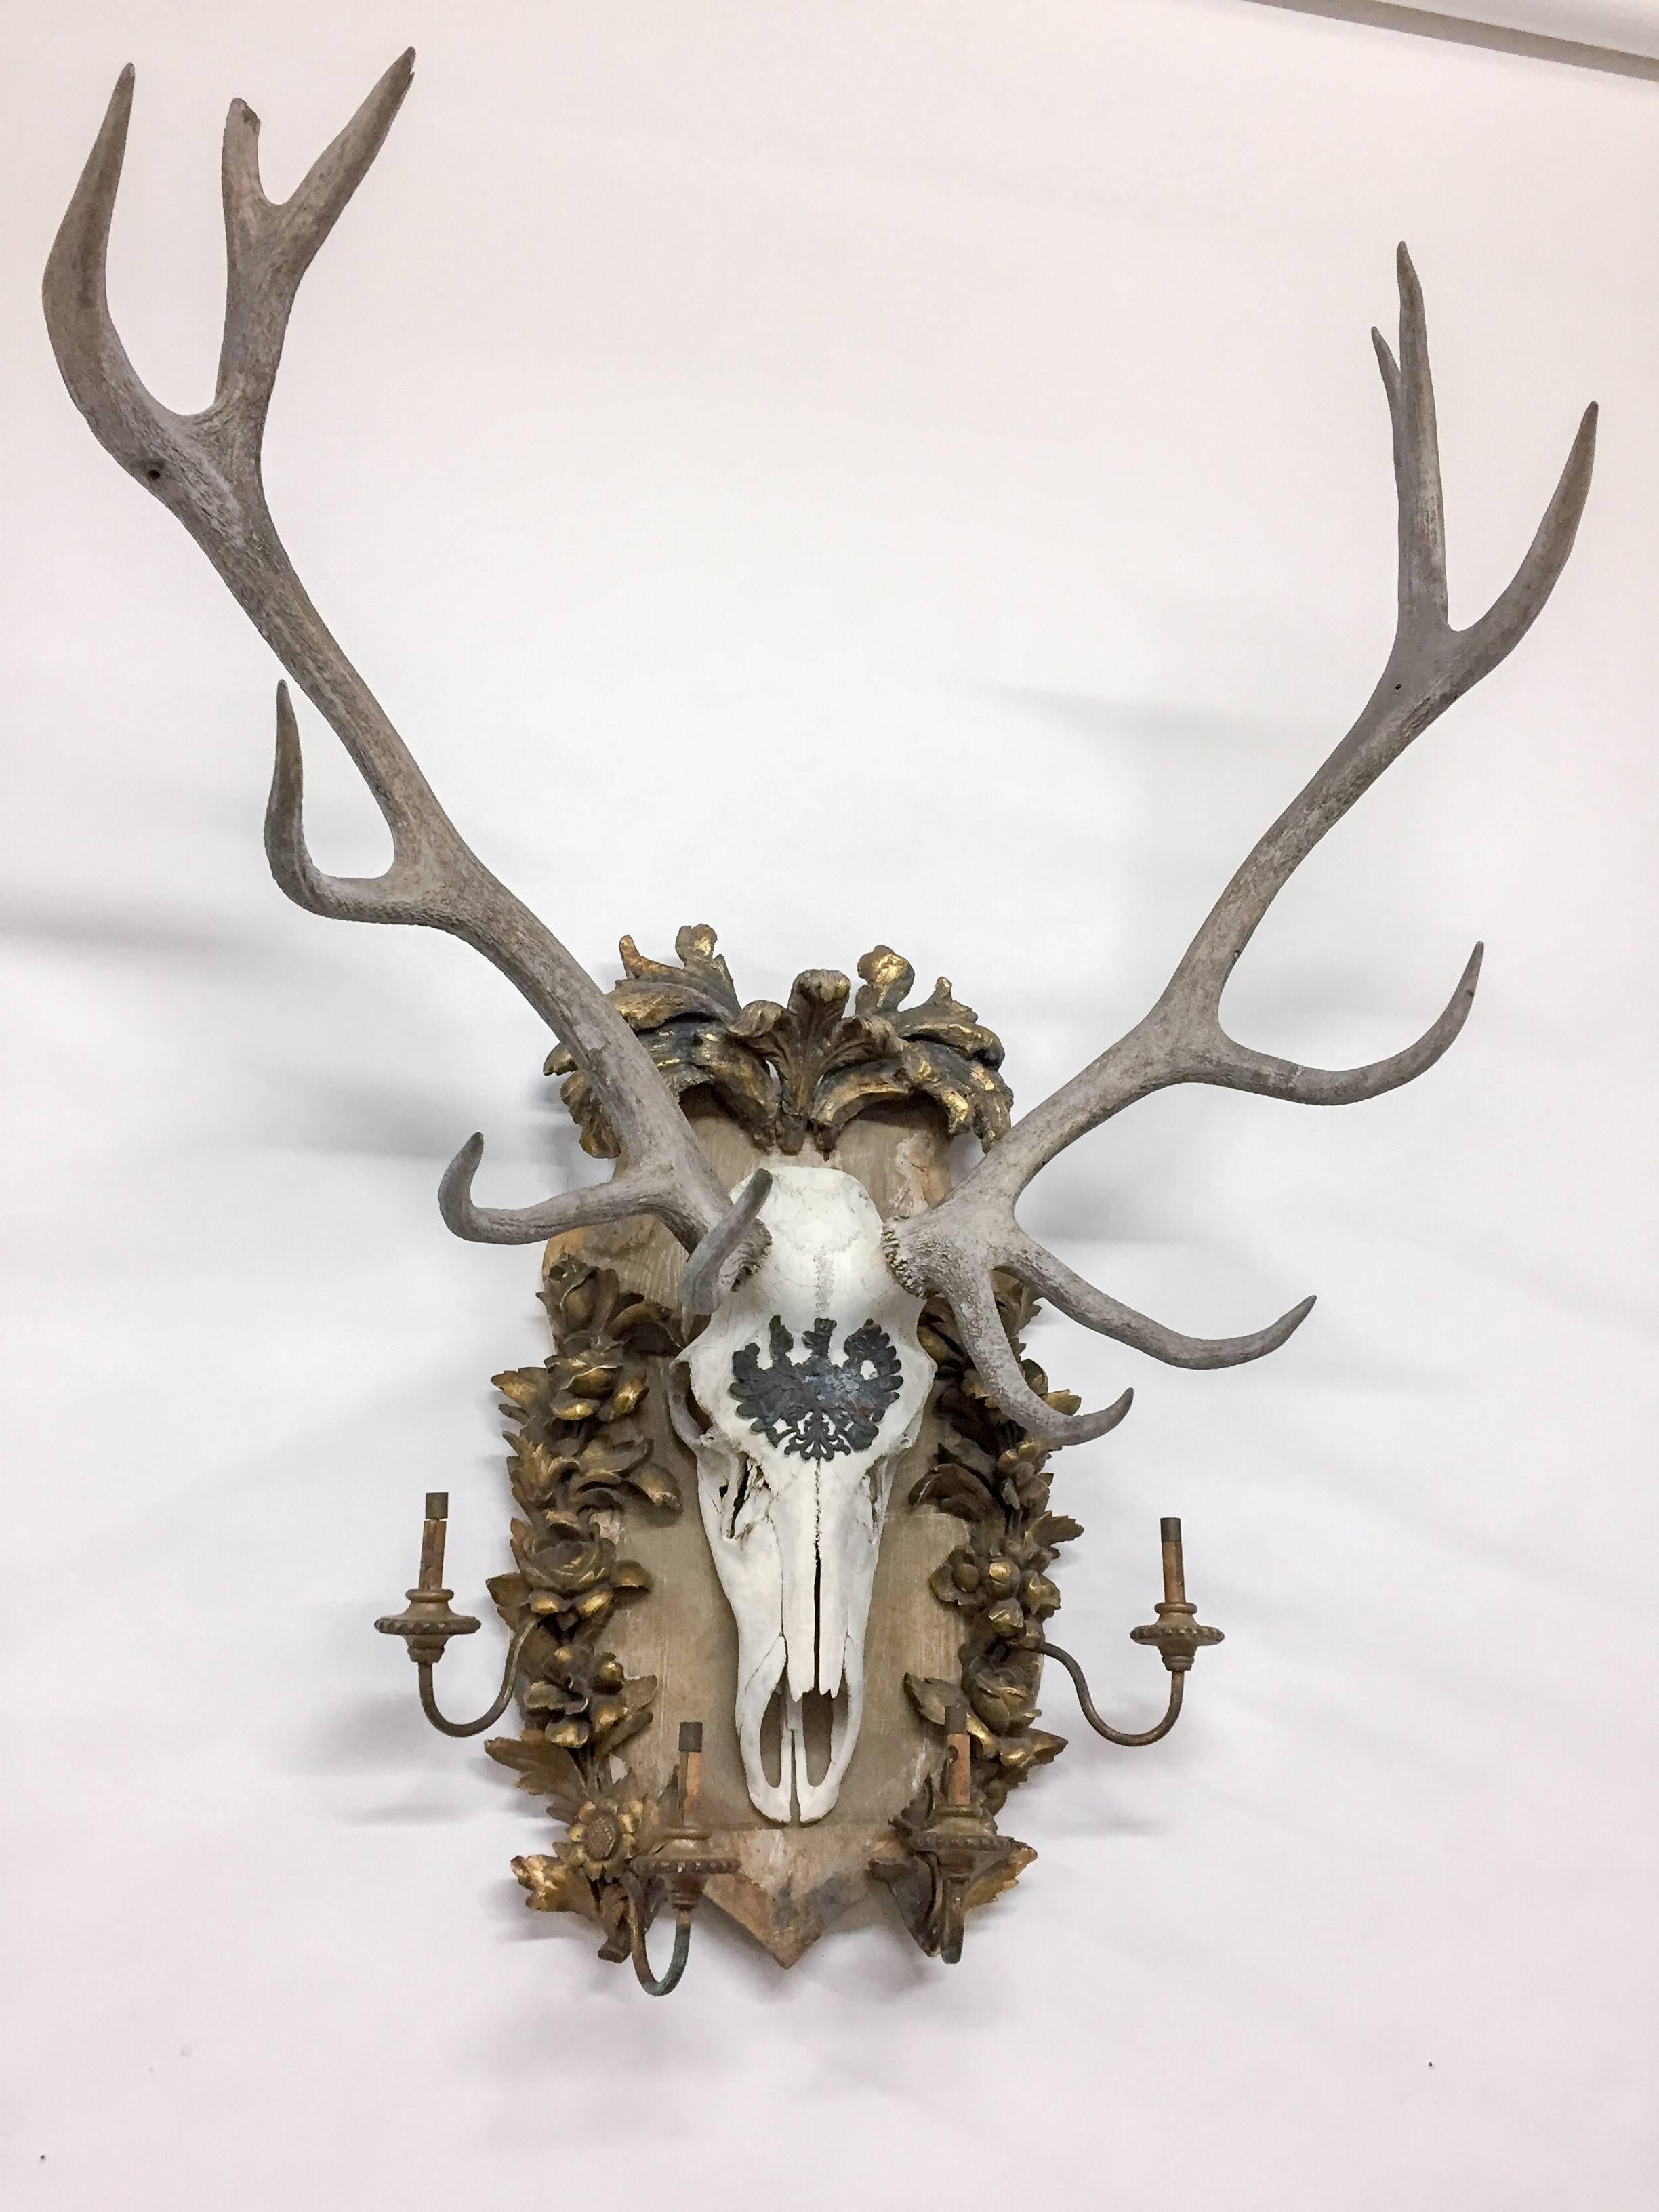 This is a wonderful, 19th century Austrian Red Stag trophy on an original, hand-carved gilt plaque featuring four brass candelabras. The decoration on the plaque itself is comprised of mostly black-forest flora on the sides and an ornate cartouche